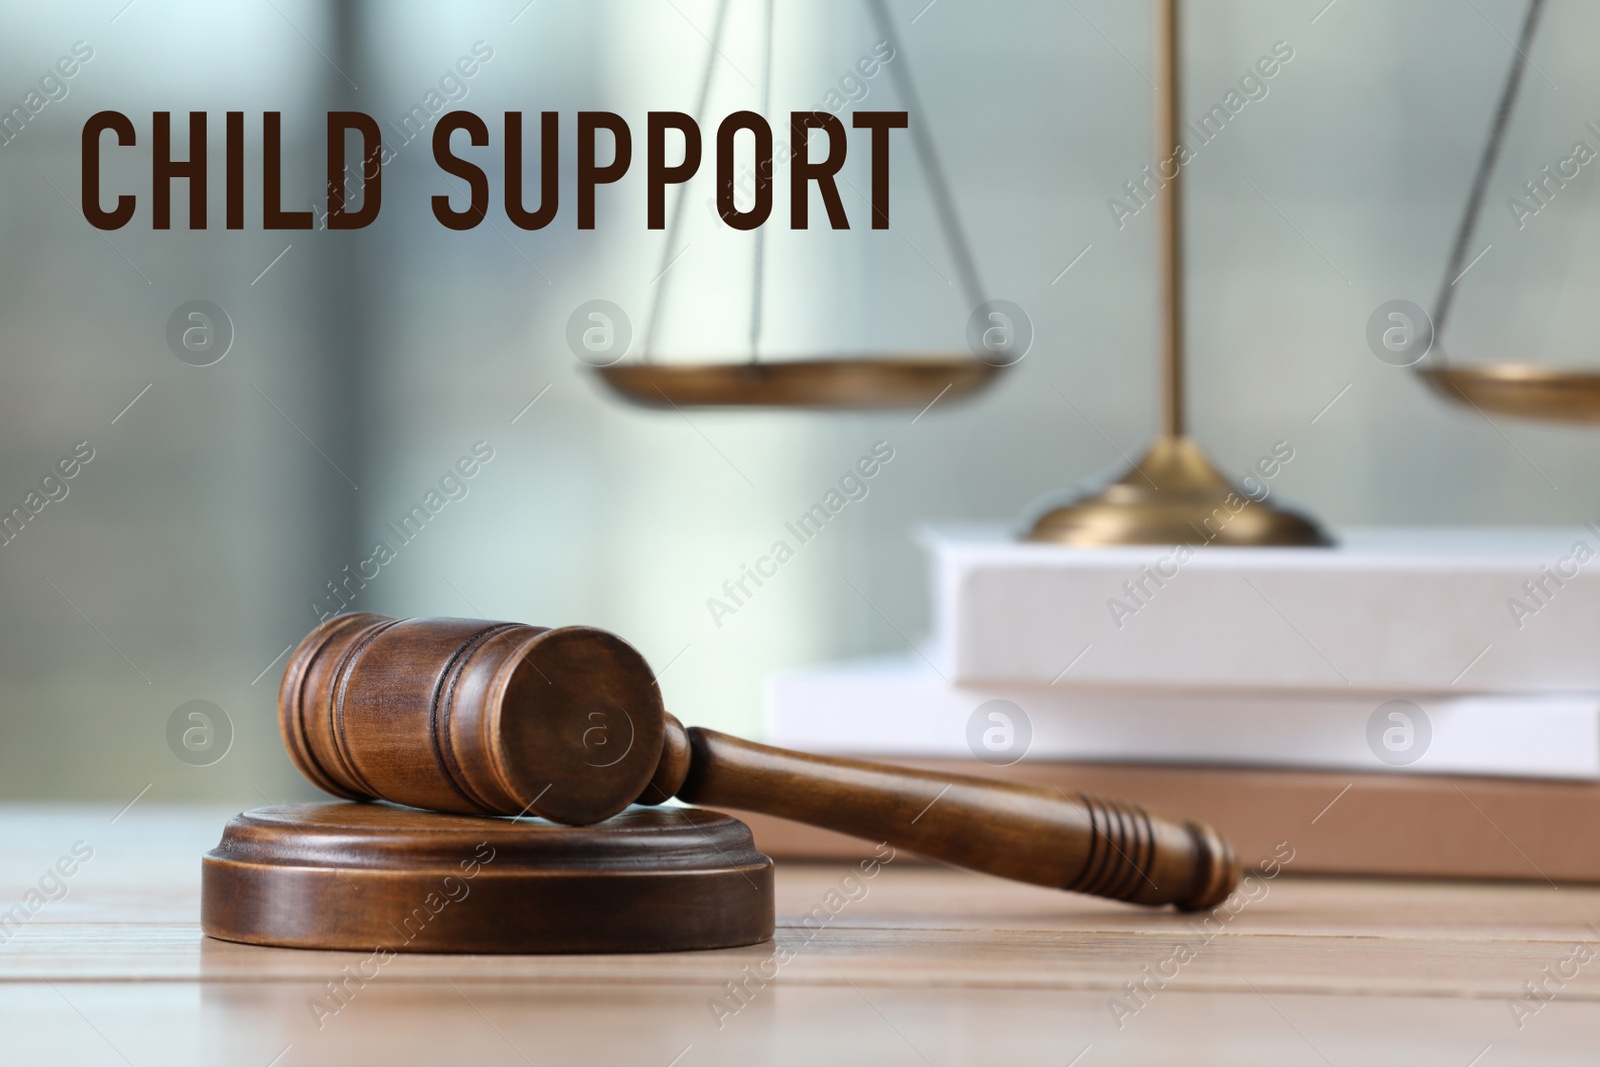 Image of Judge's gavel, scales of justice and book on wooden table. Child support concept